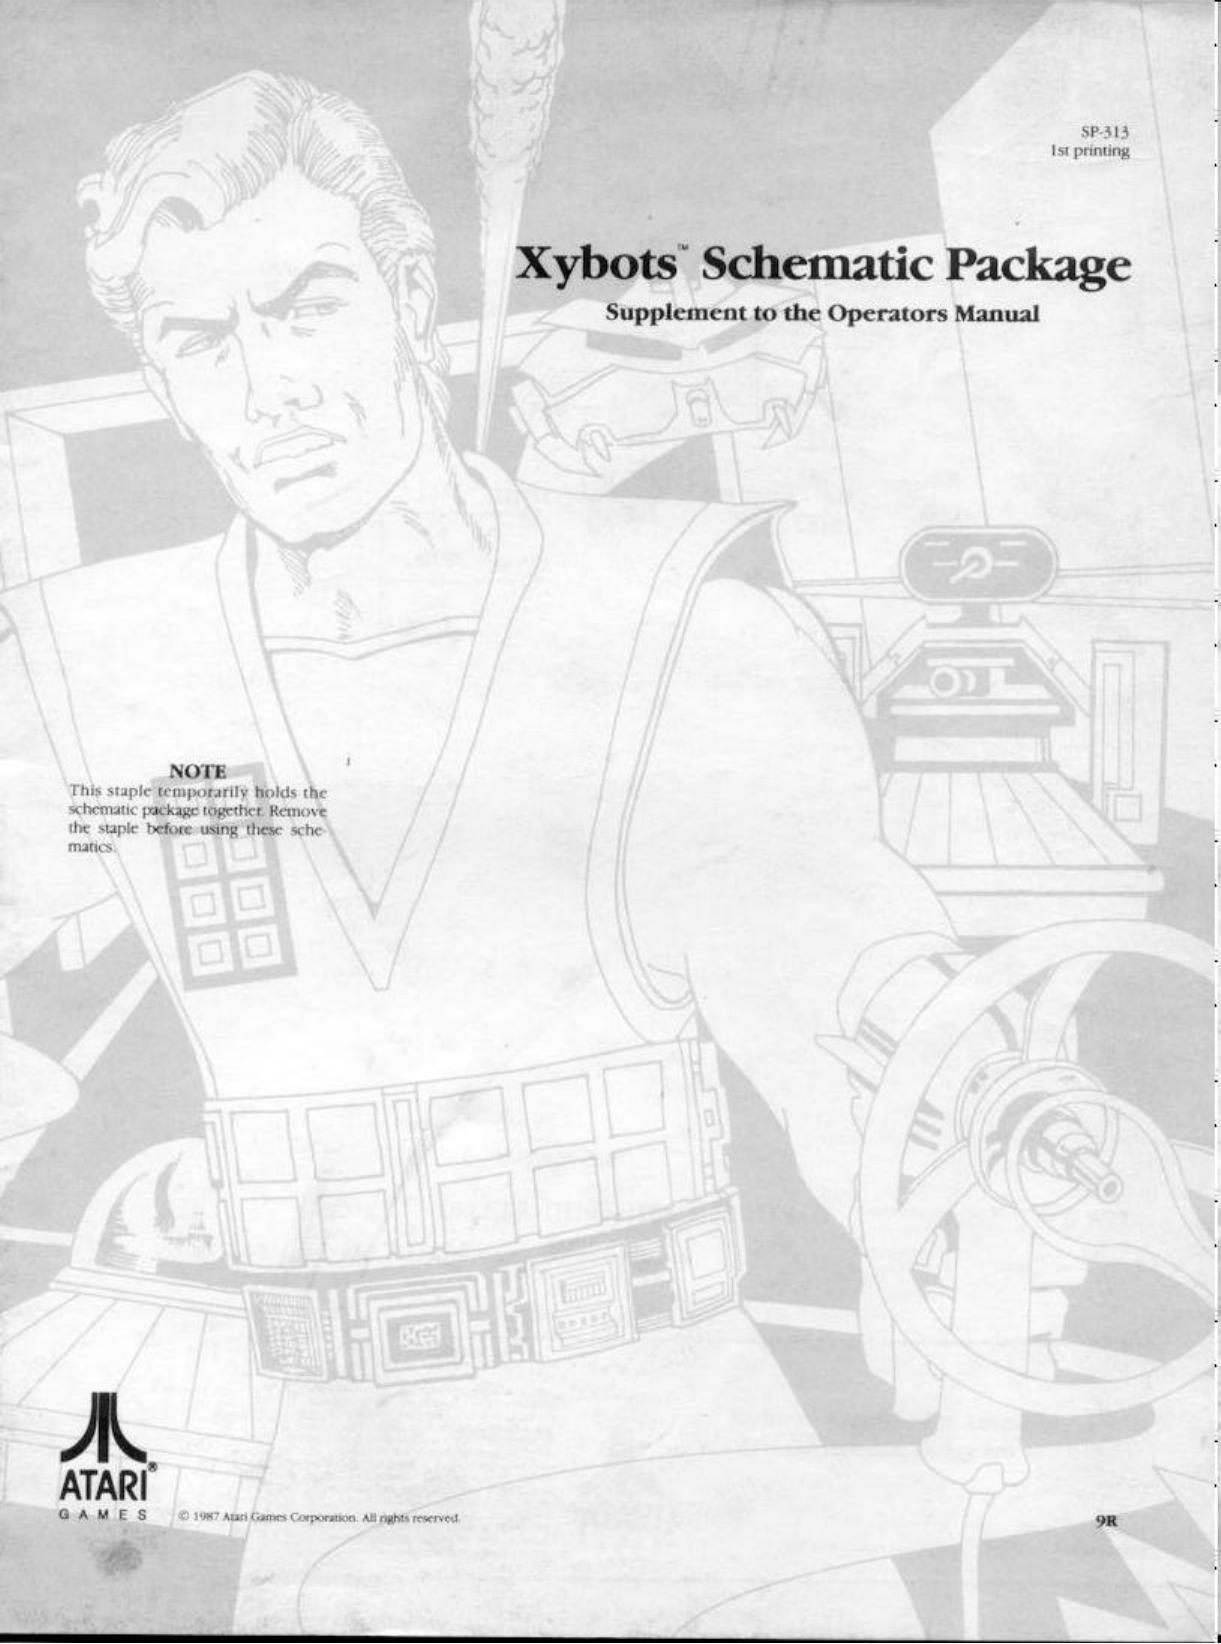 Xybots (SP-313 1st Printing) (Schematic Package) (U)